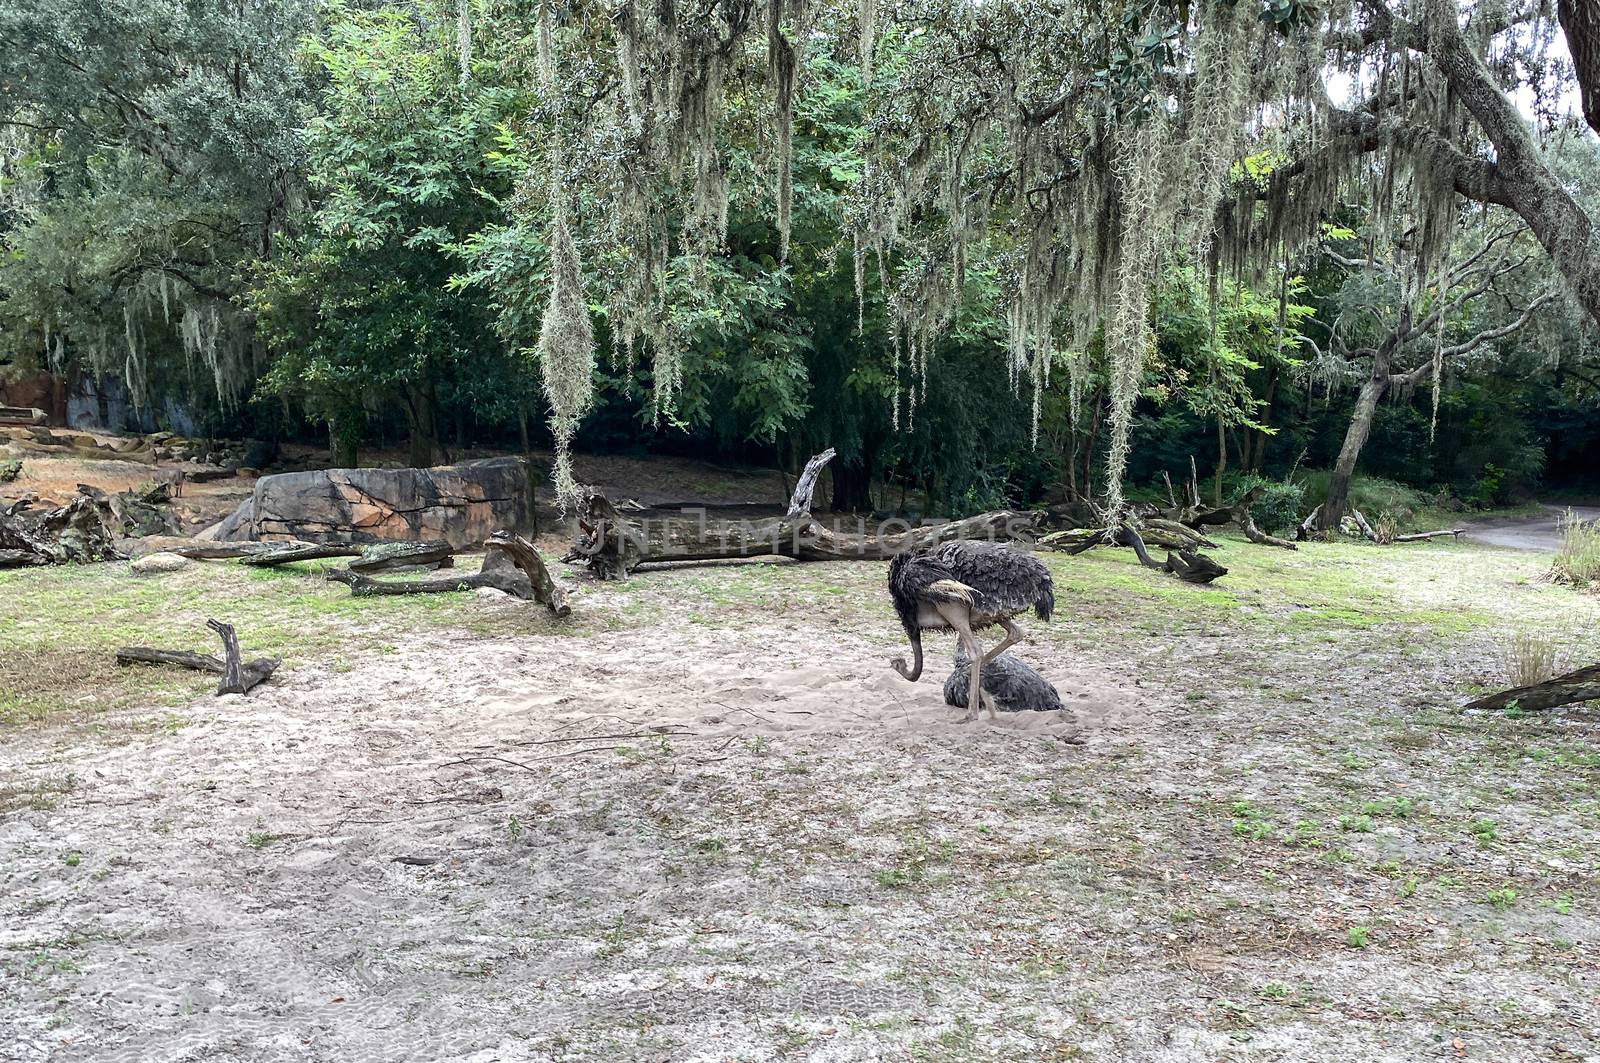 Two Ostriches hanging out at a zoo in Orlando, Florida.